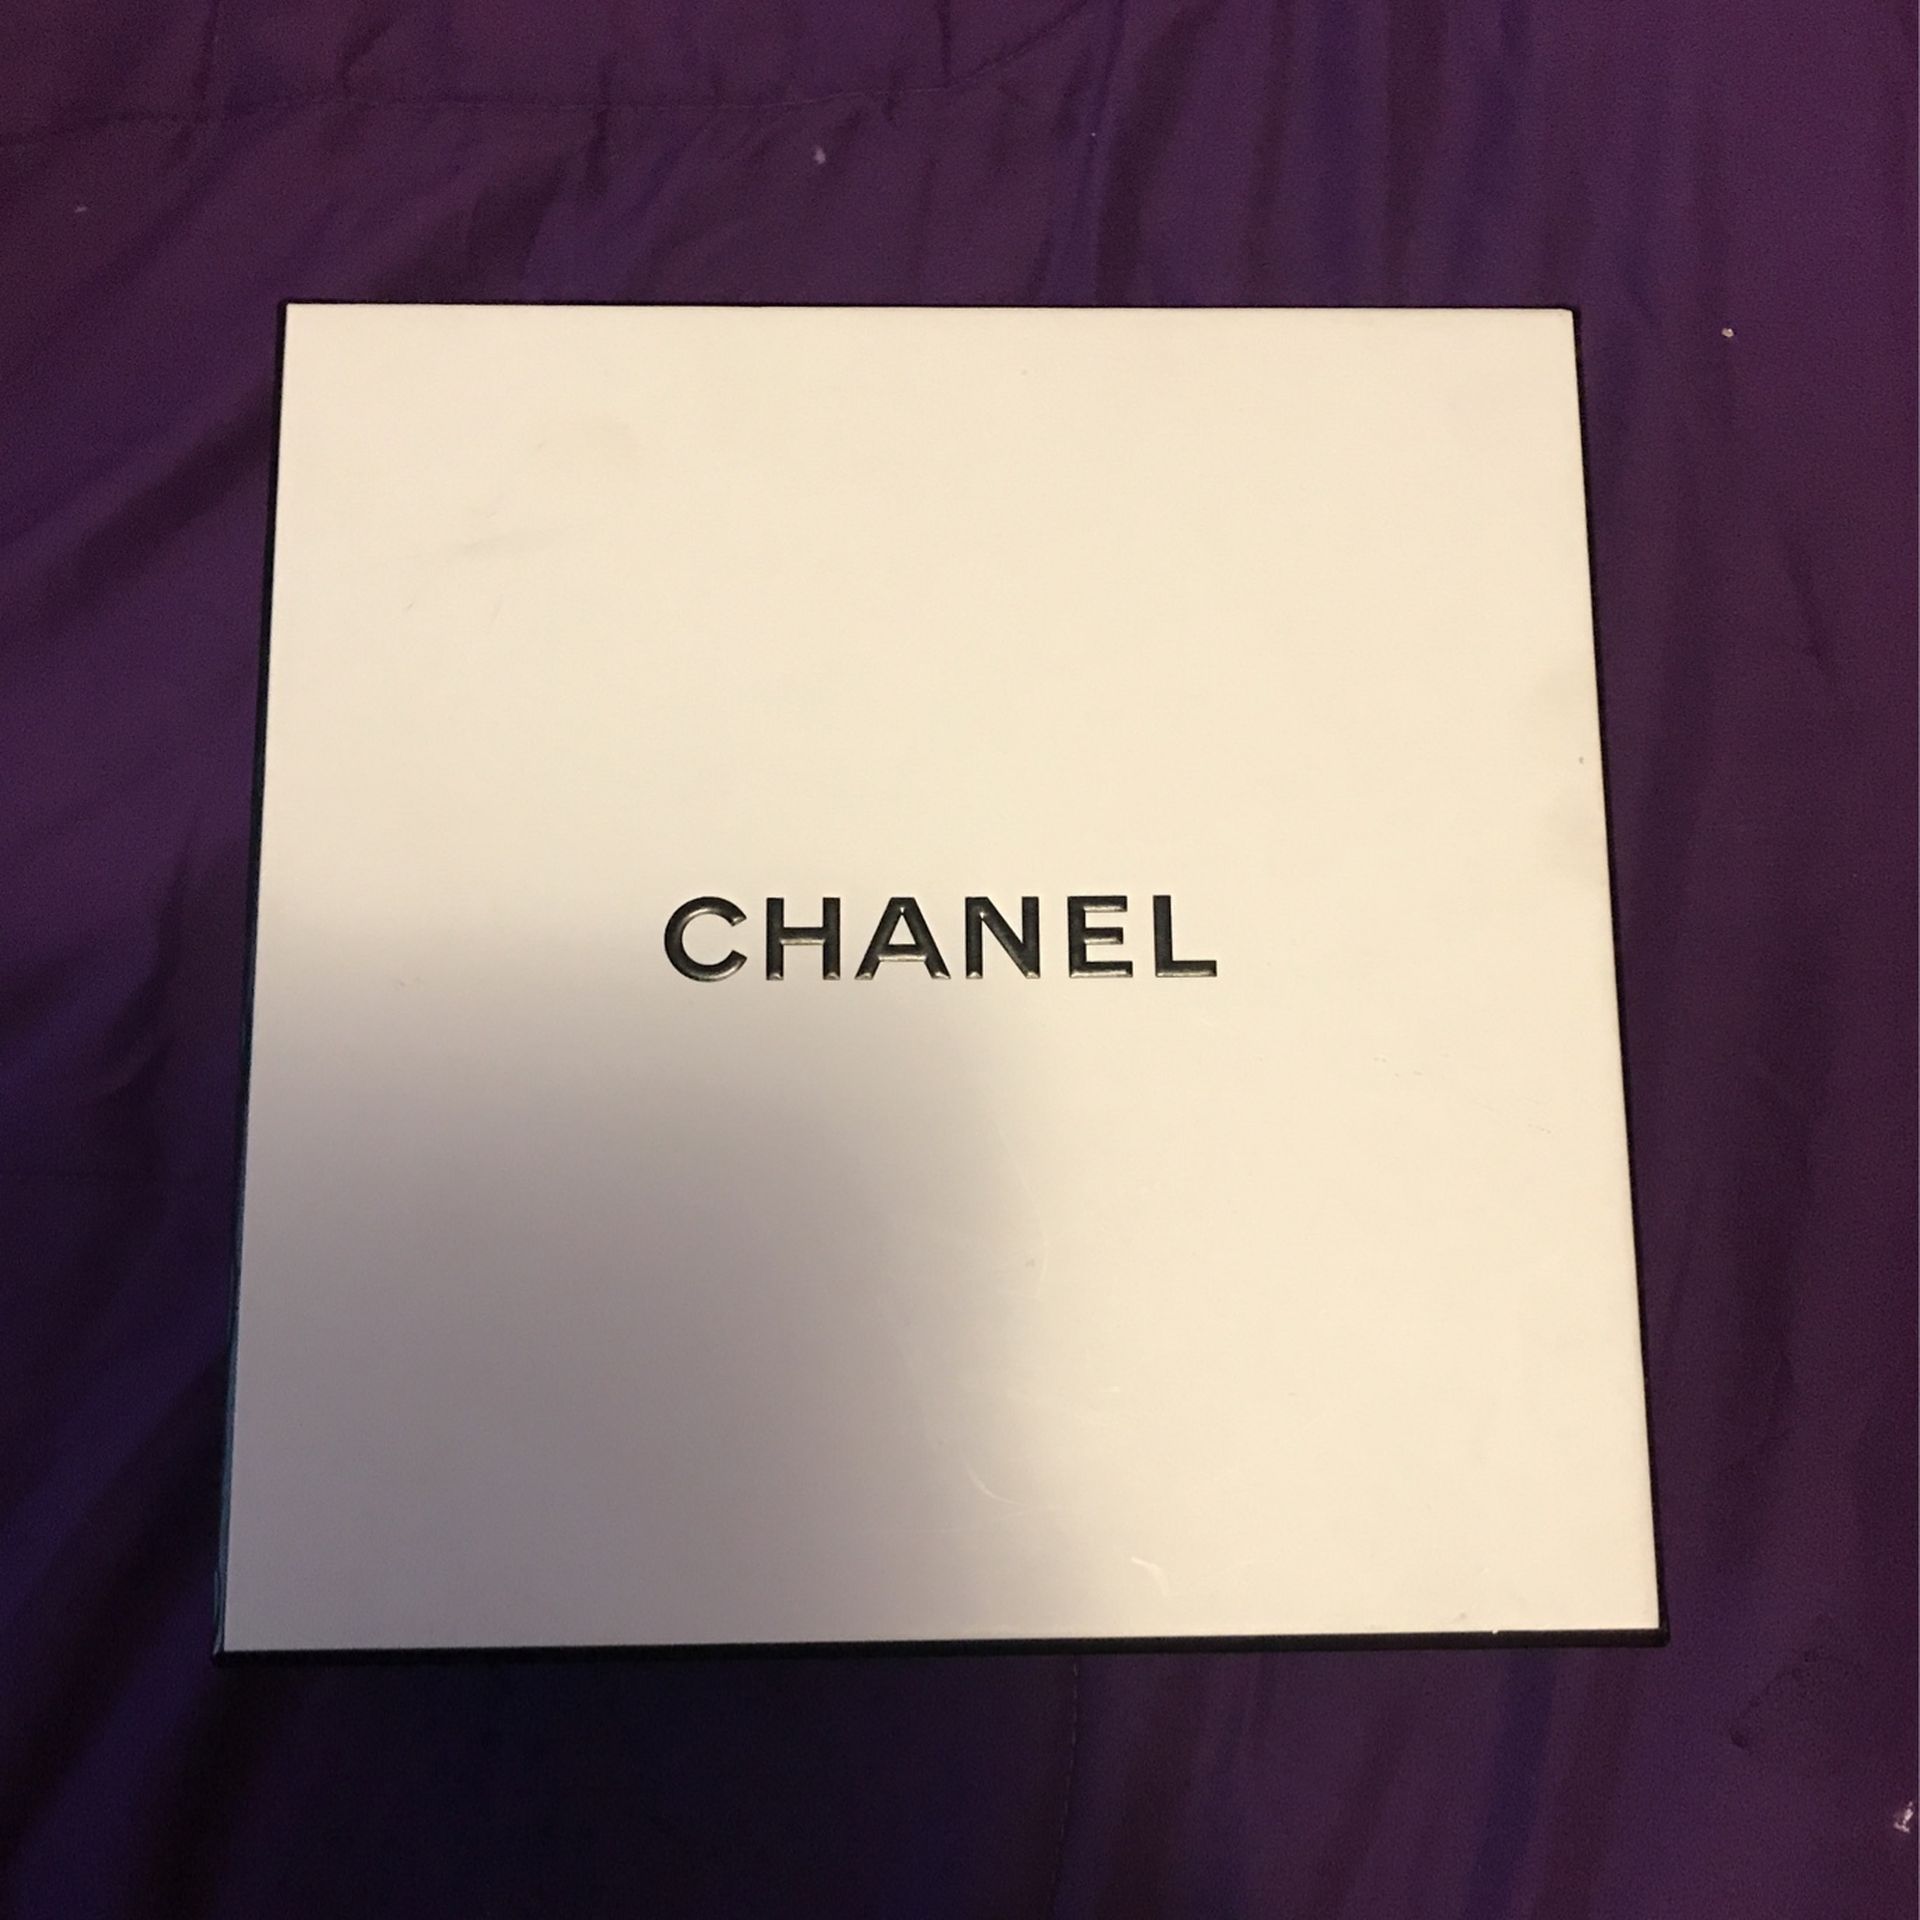 (New) Chanel perfume and body lotion